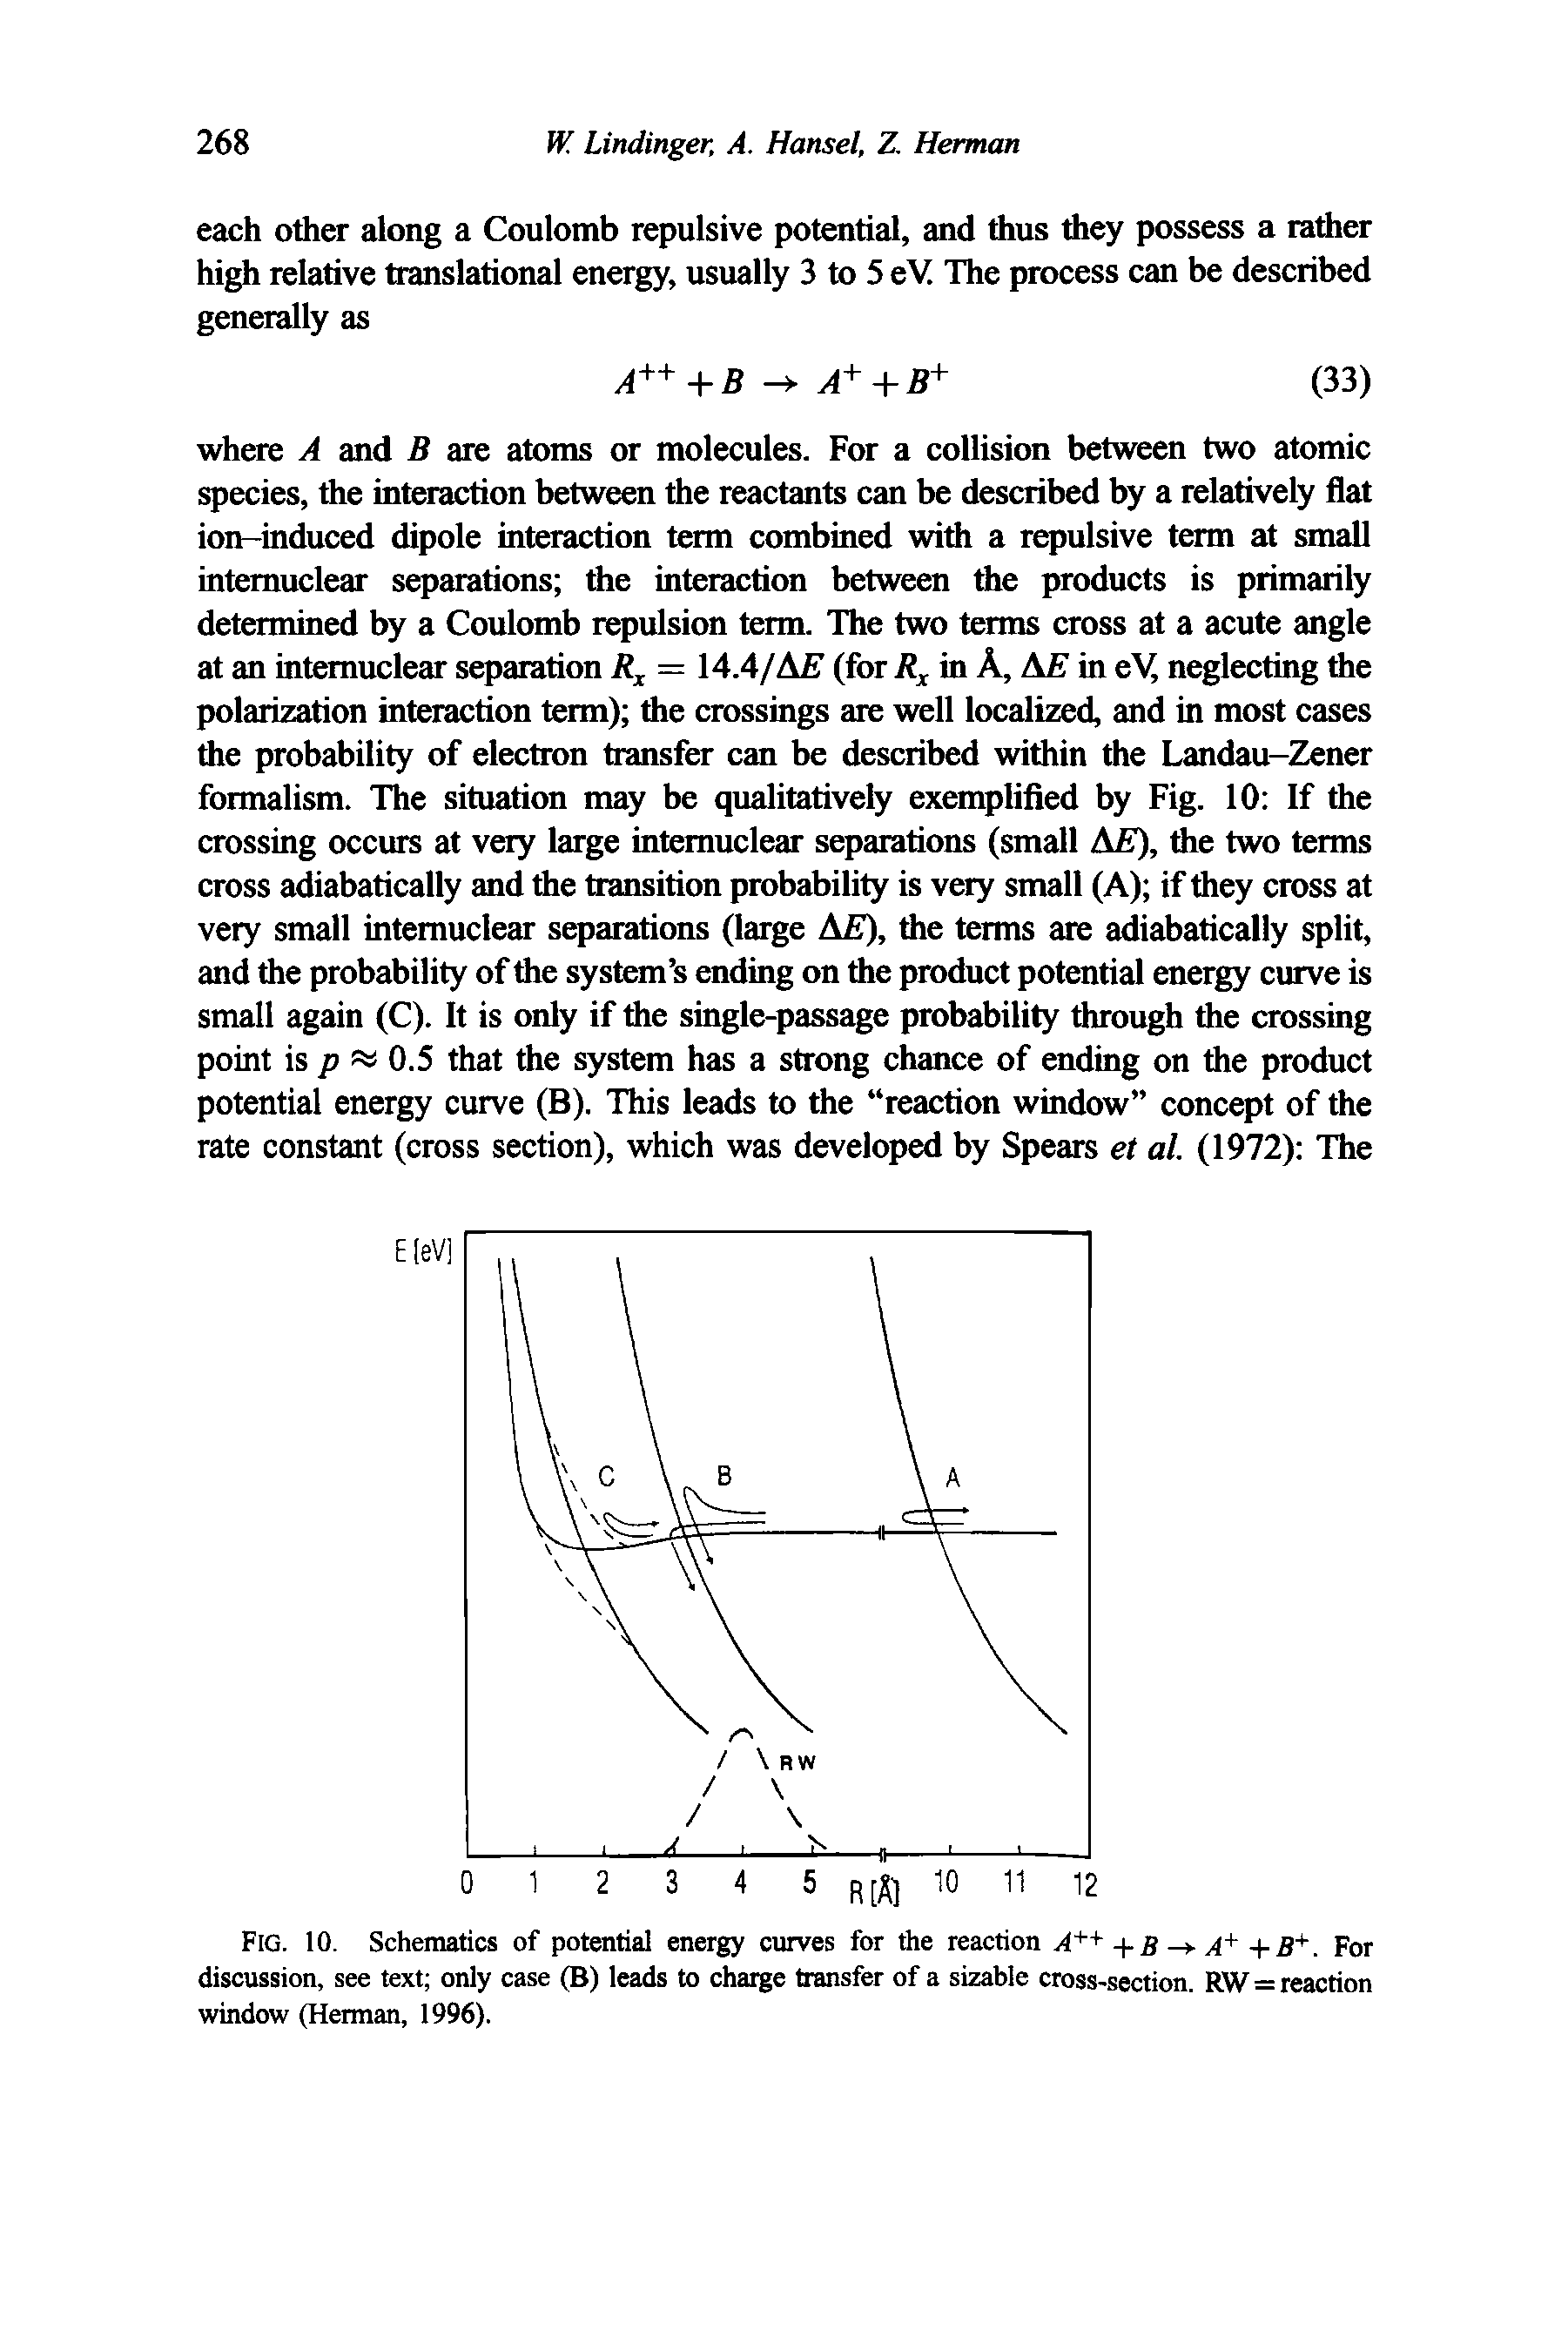 Fig. 10. Schematics of potential energy curves for the reaction. 4 ++B.4+For discussion, see text only case (B) leads to charge transfer of a sizable cross-section. RW = reaction window (Herman, 1996).